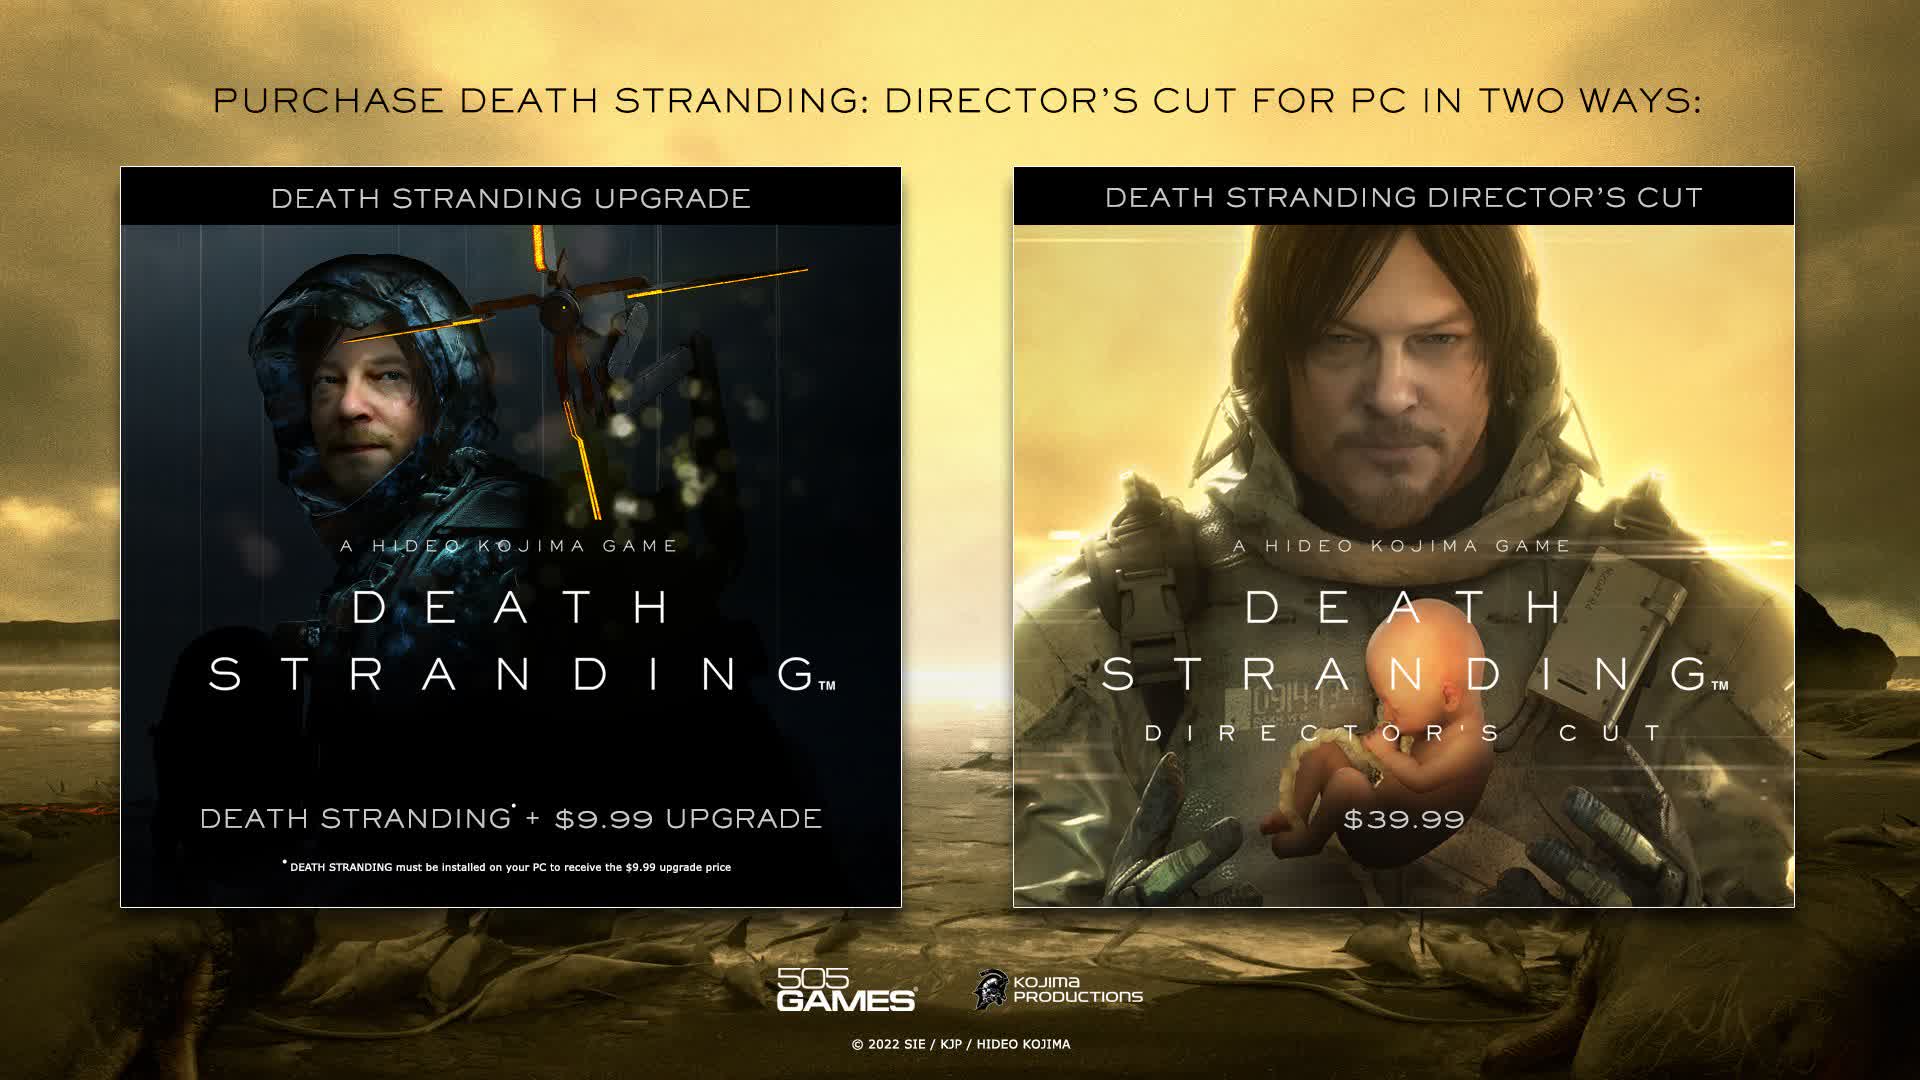 Death Stranding Director's Cut lands on March 30 as a $10 upgrade for base game owners